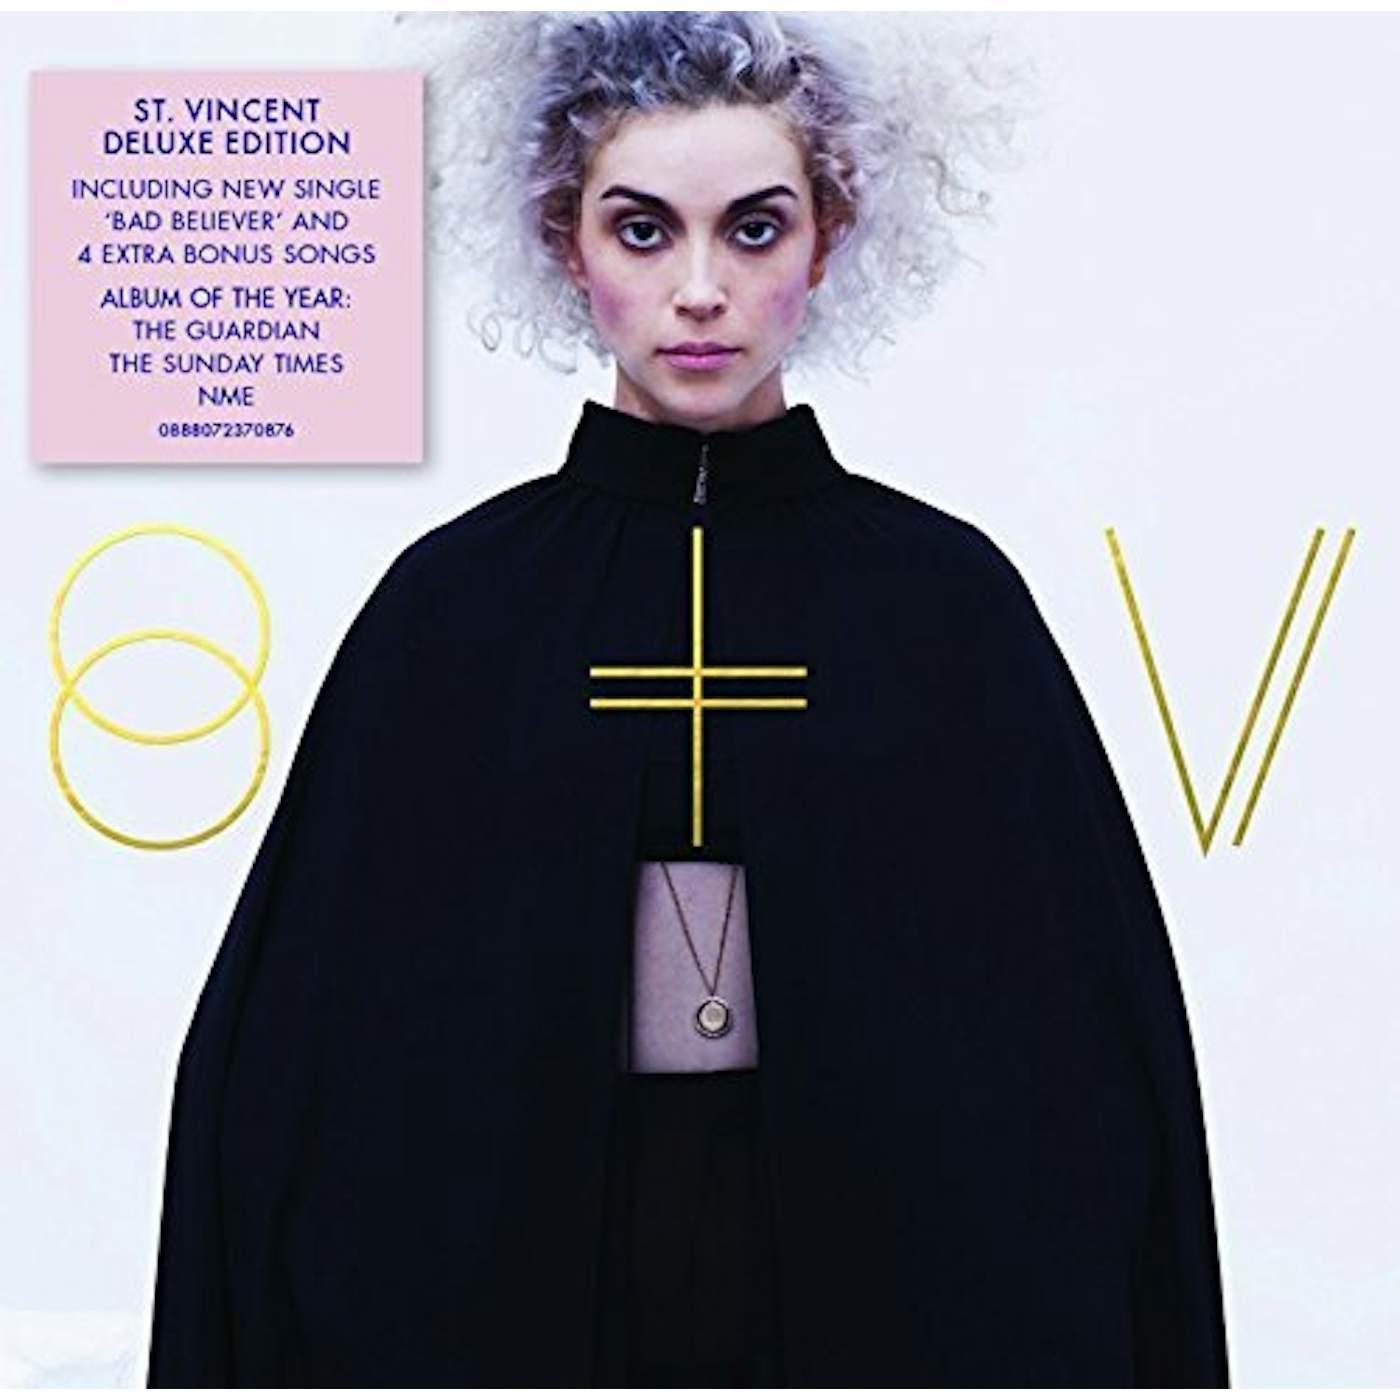 St. Vincent: DELUXE CD